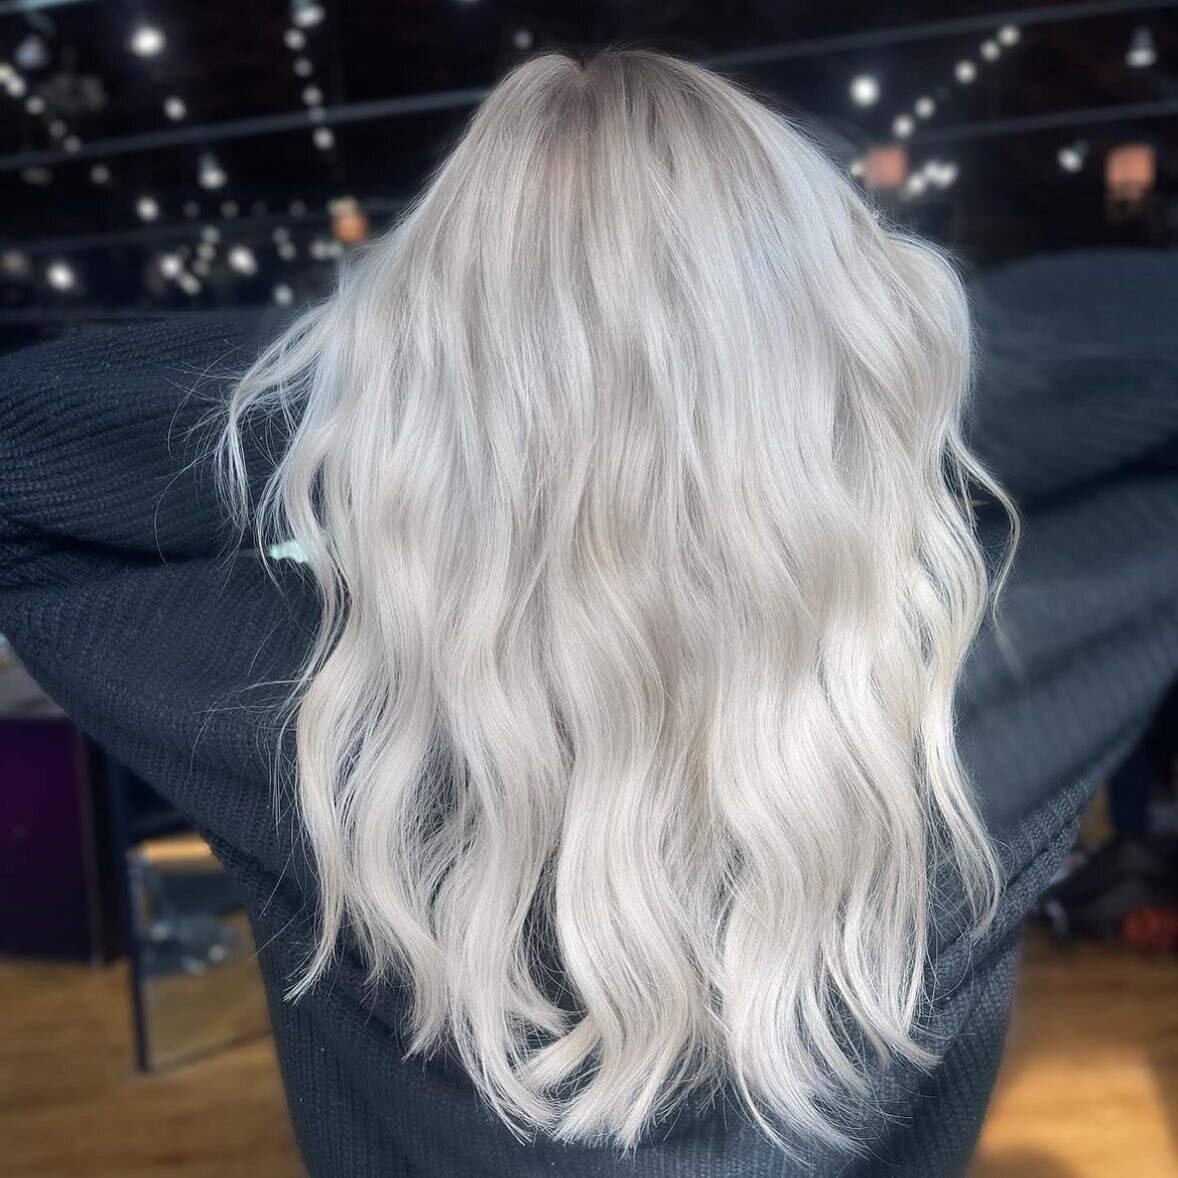 Now that&rsquo;s what I call platinum 🤩

Hair by @_beautybyymarissa_